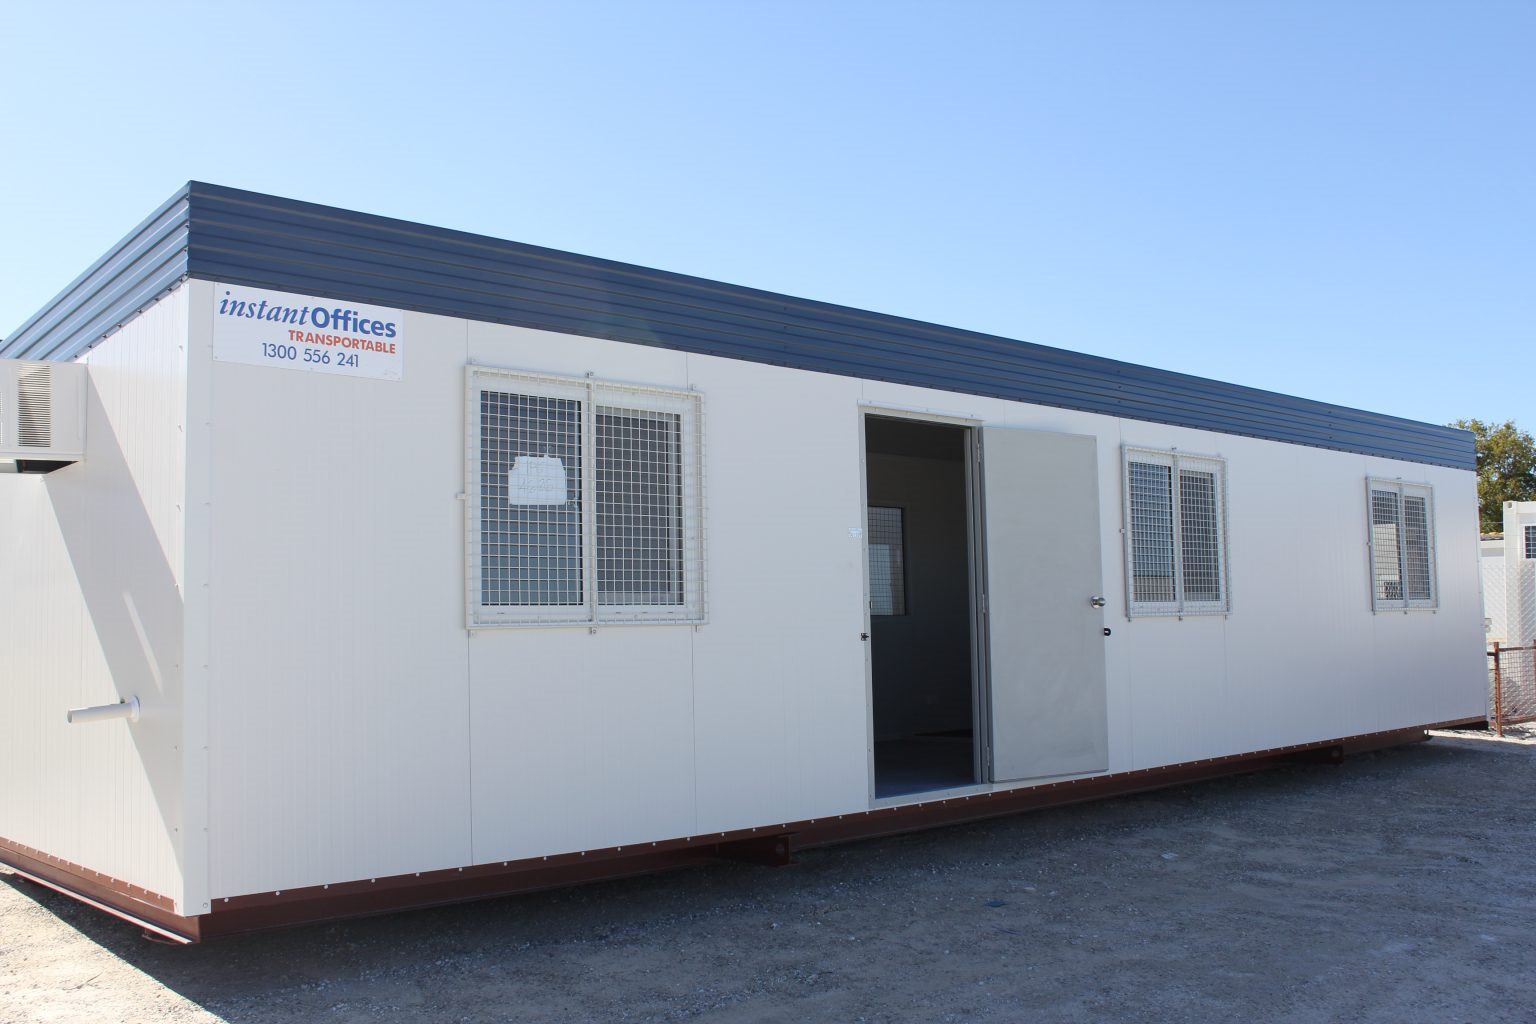 Portable modular office building by Instant Offices featuring white walls, security windows, and a blue roof.